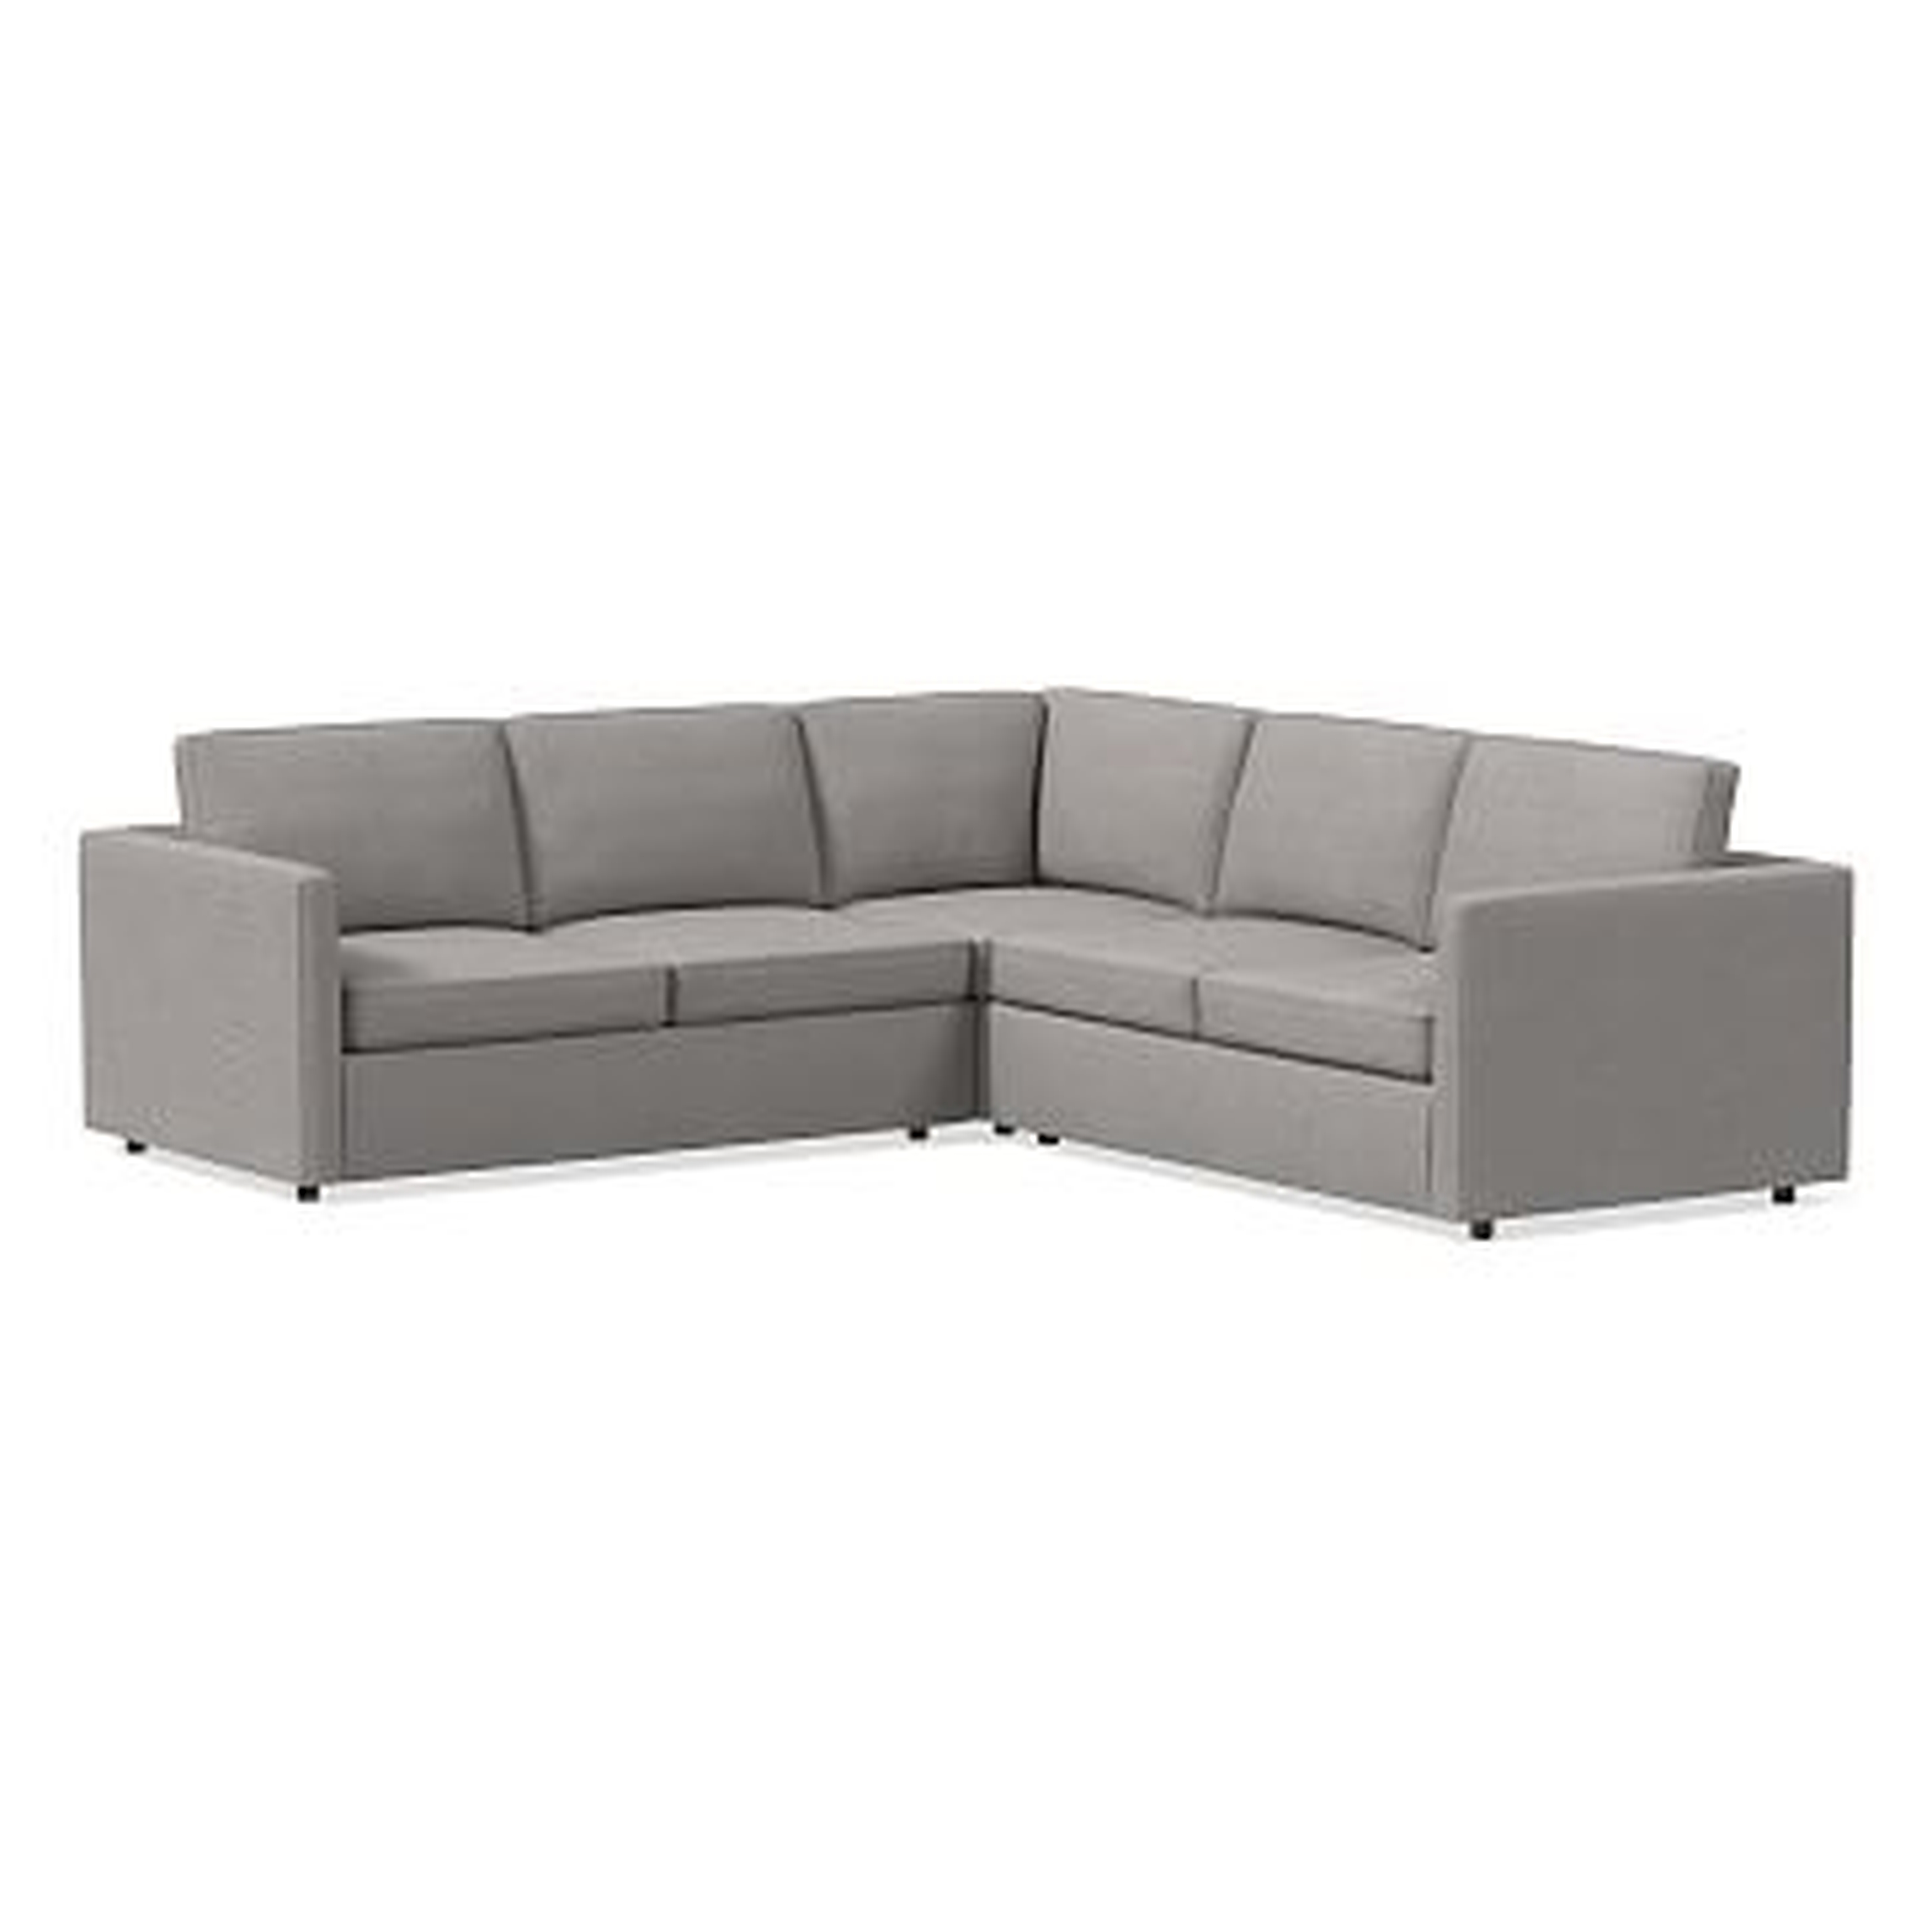 Harris Sectional Set 13: Left Arm 65" Sofa, Corner, Right Arm 65" Sofa, Poly, Heathered Tweed, Cement, - West Elm